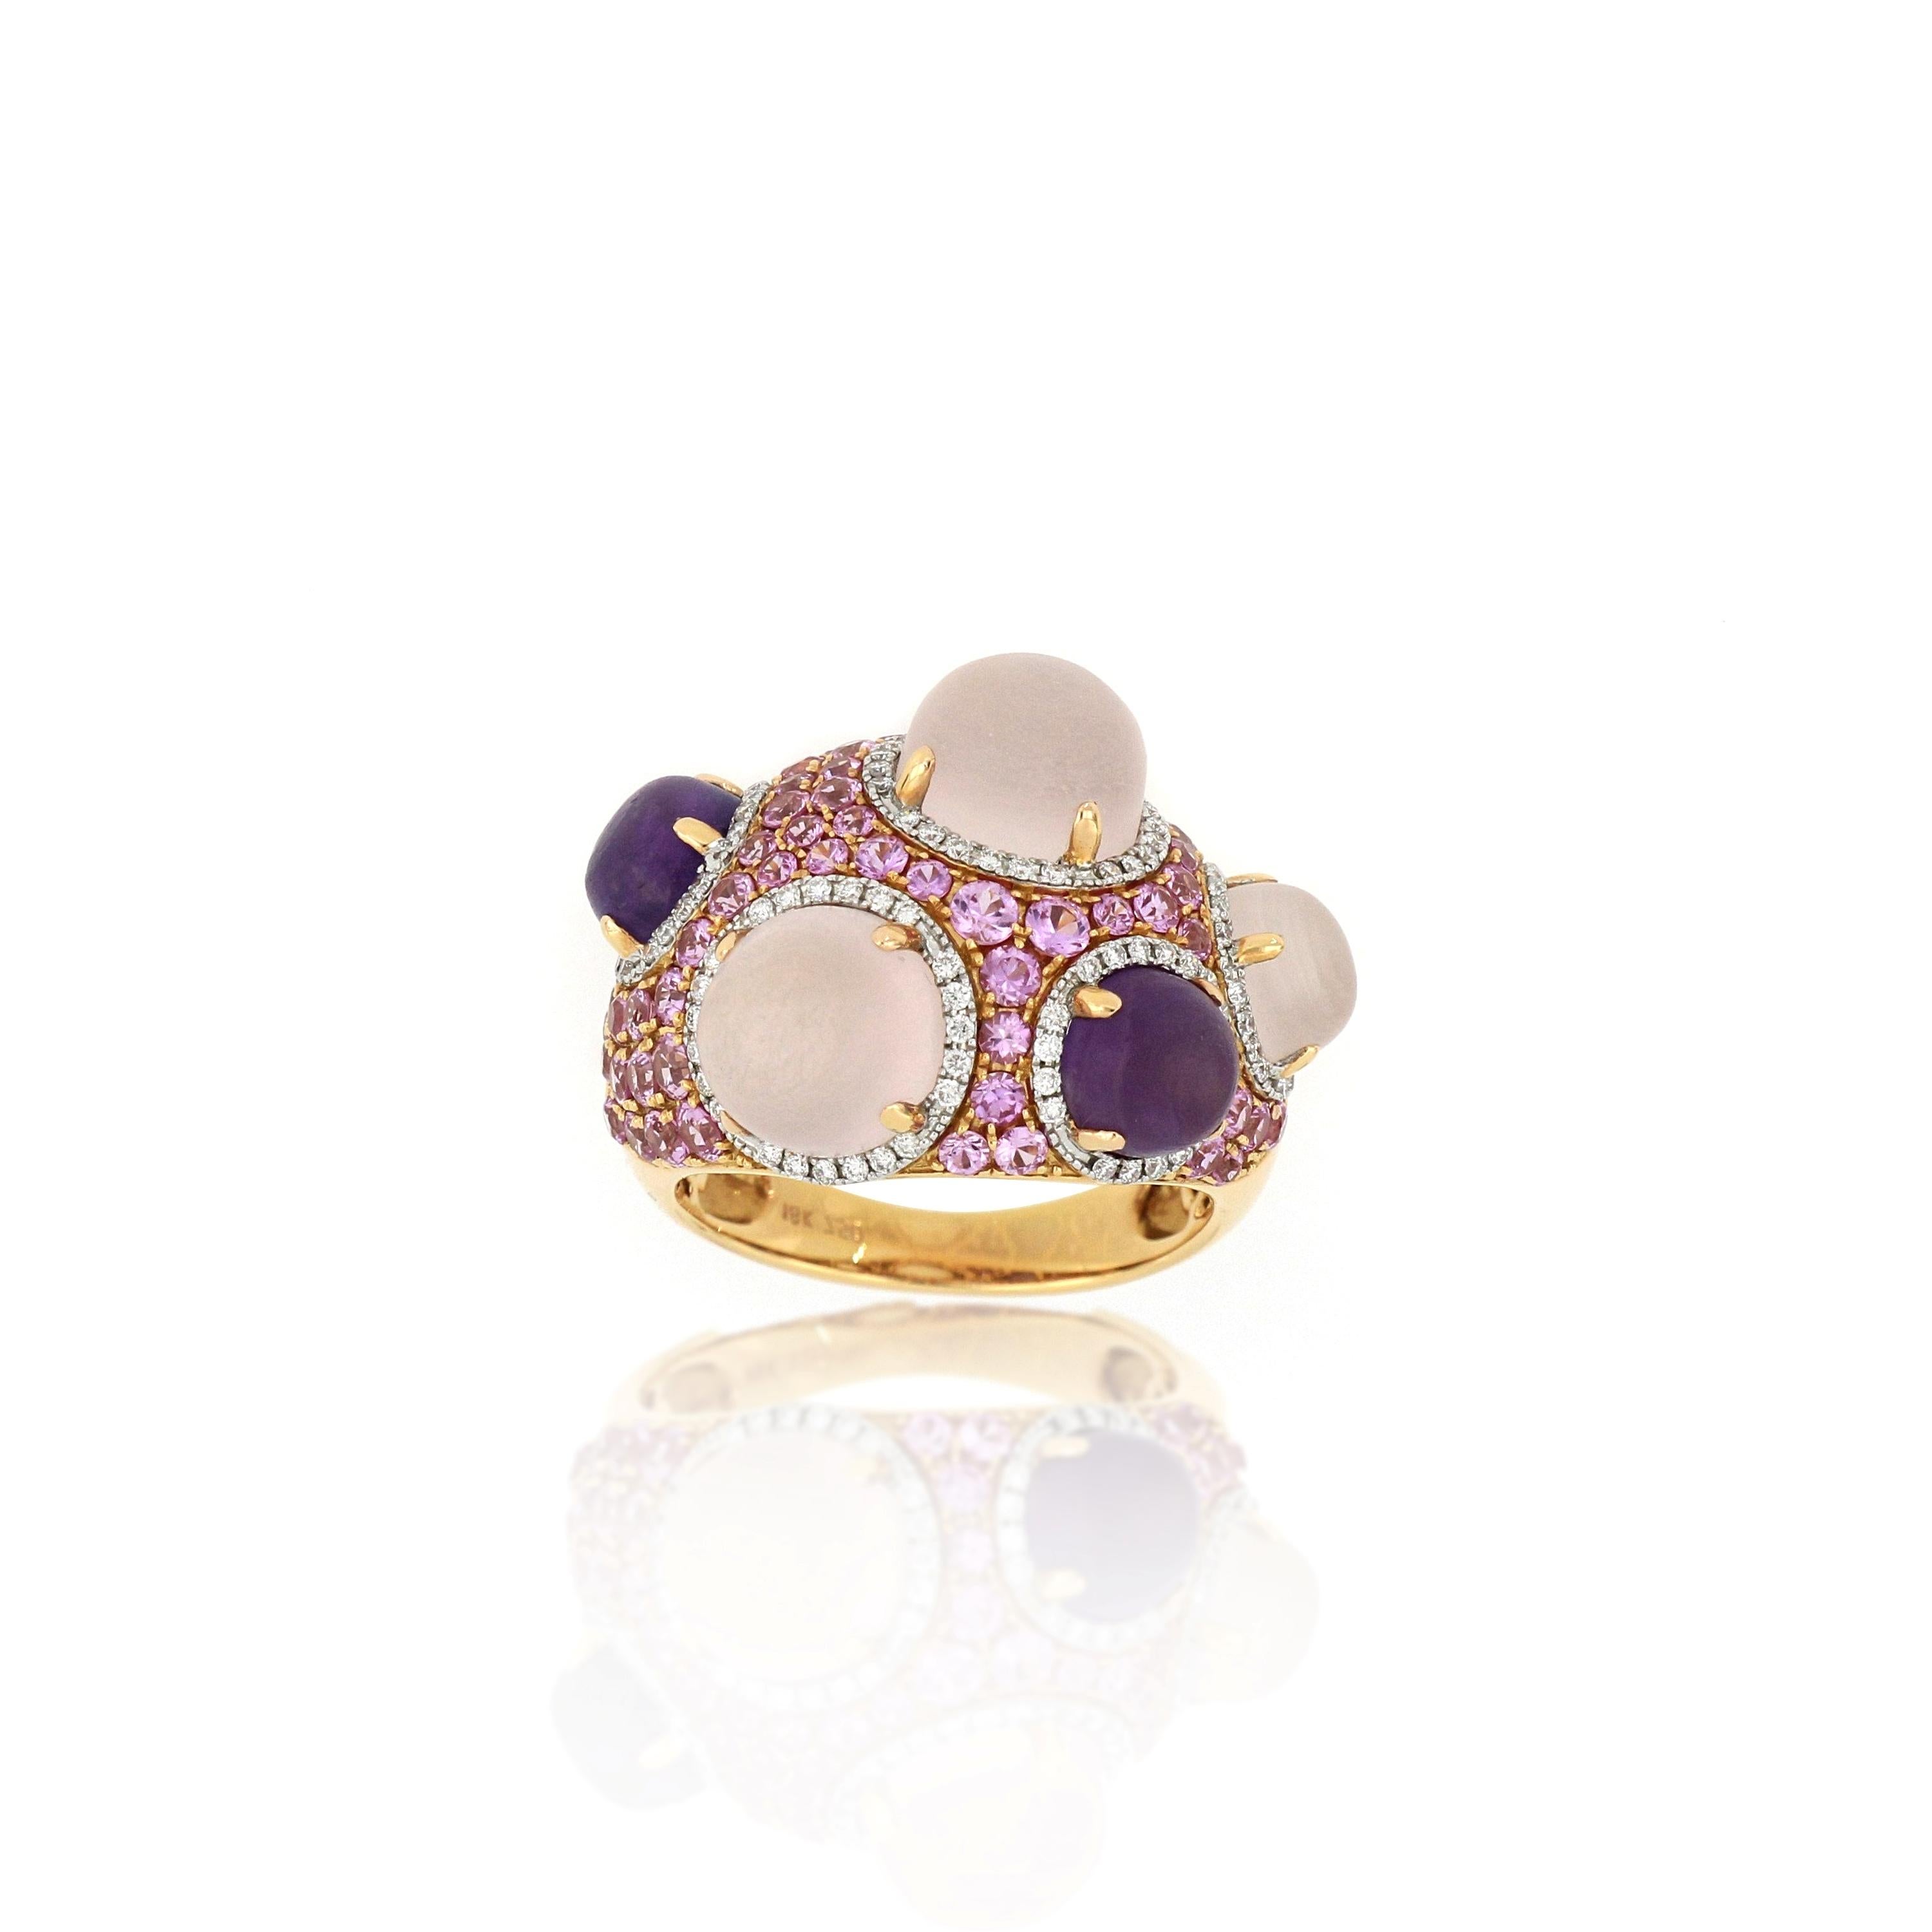 This large unique cocktail ring features 2 natural amethyst and 3 pink quartz, weighing 2.31ct and 6.72ct respectively, surmounted with pink sapphire (1.53ct)  and diamonds (0.33ct), mounted in 18 karat rose gold.

O’Che 1867 is renowned for its